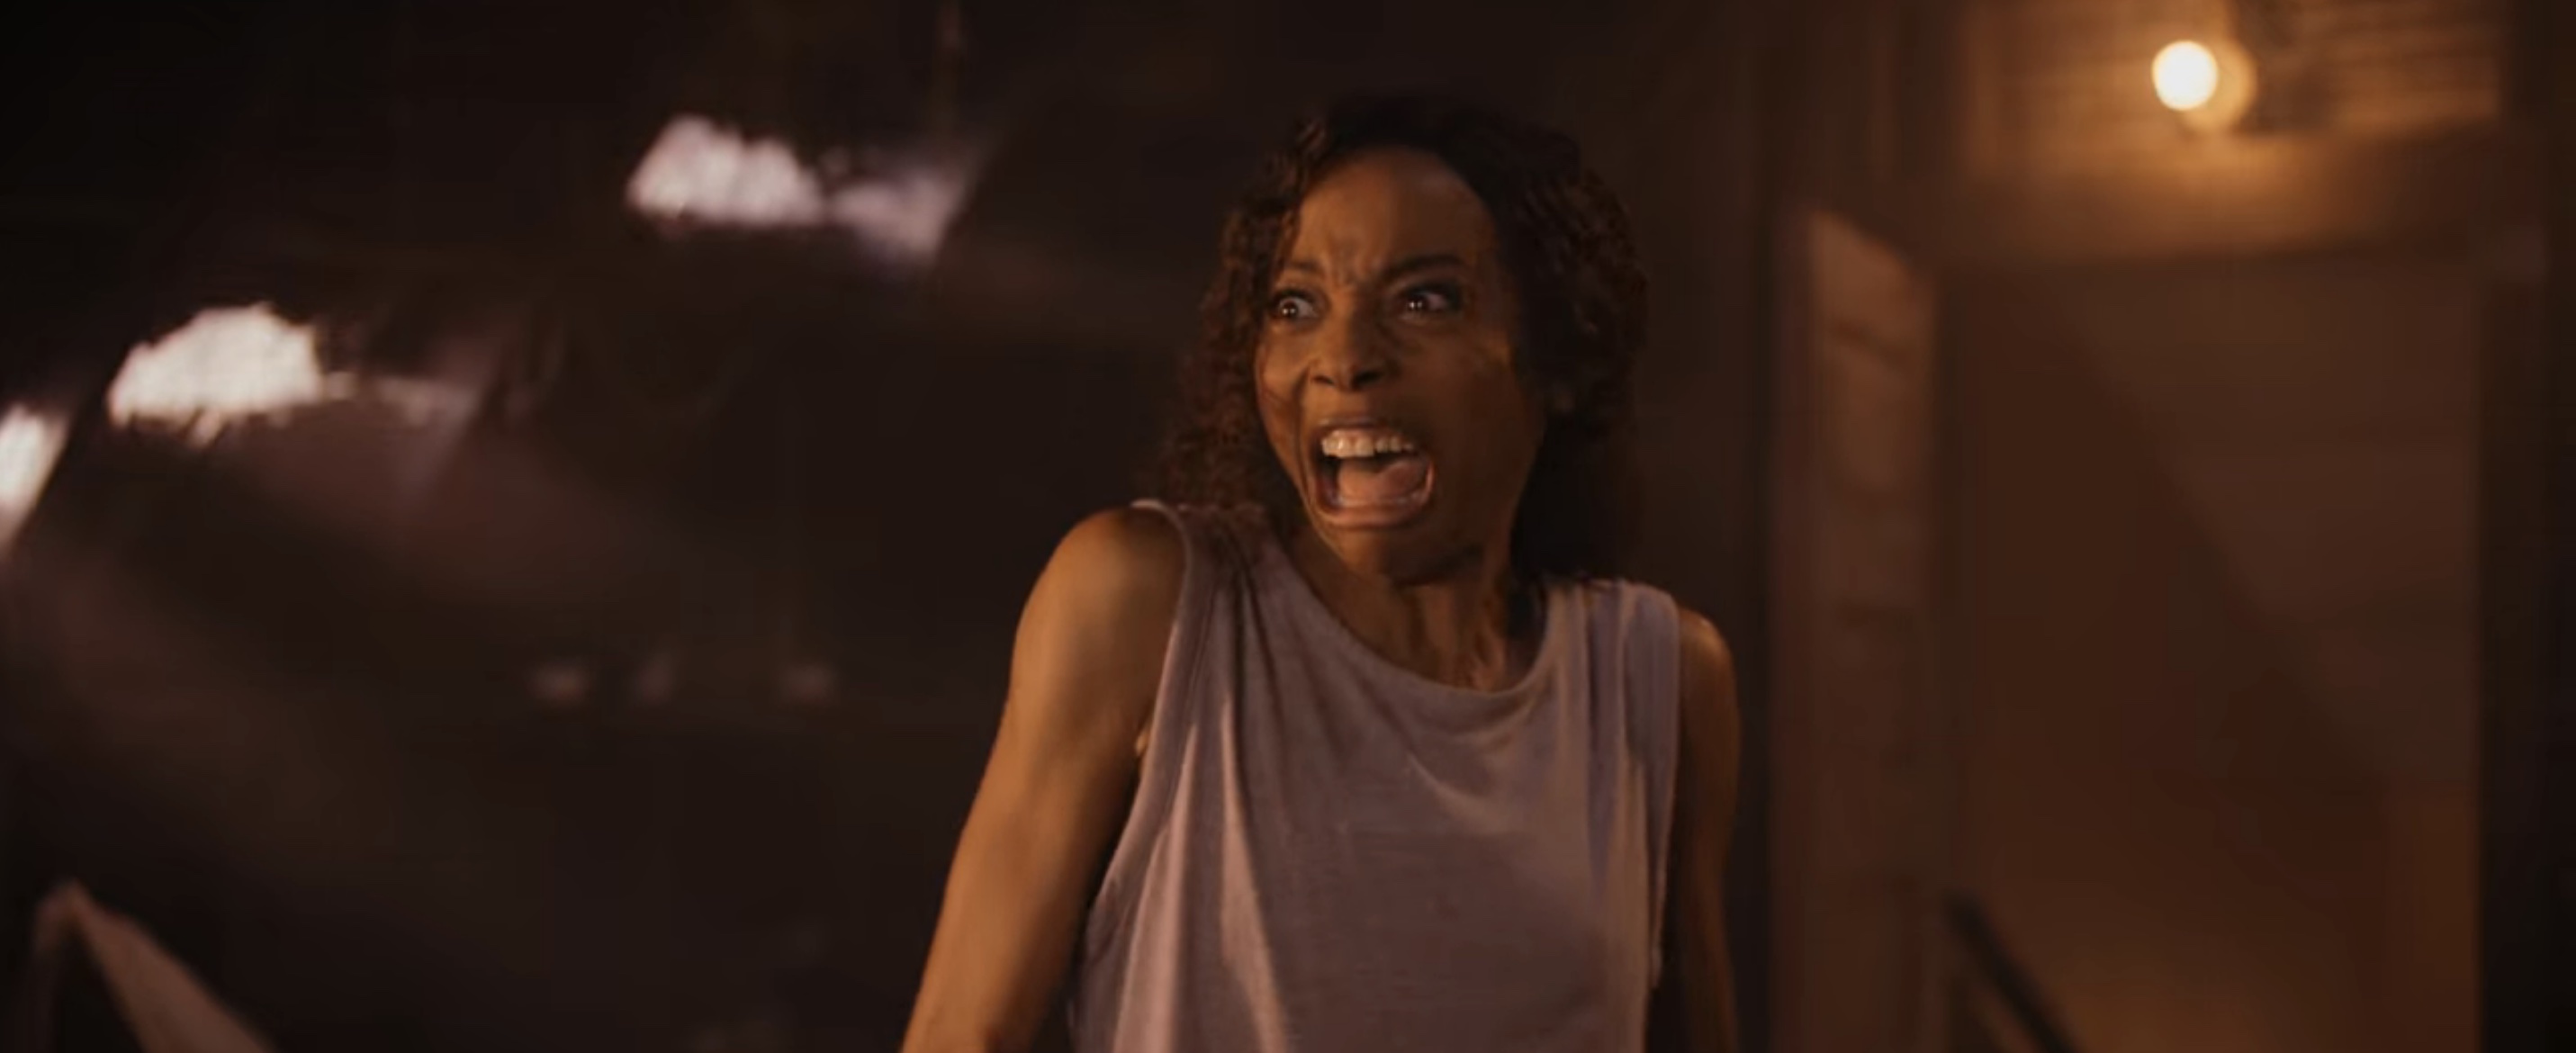 We Have a Ghost Cast on Netflix - Erica Ash as Melanie Presley